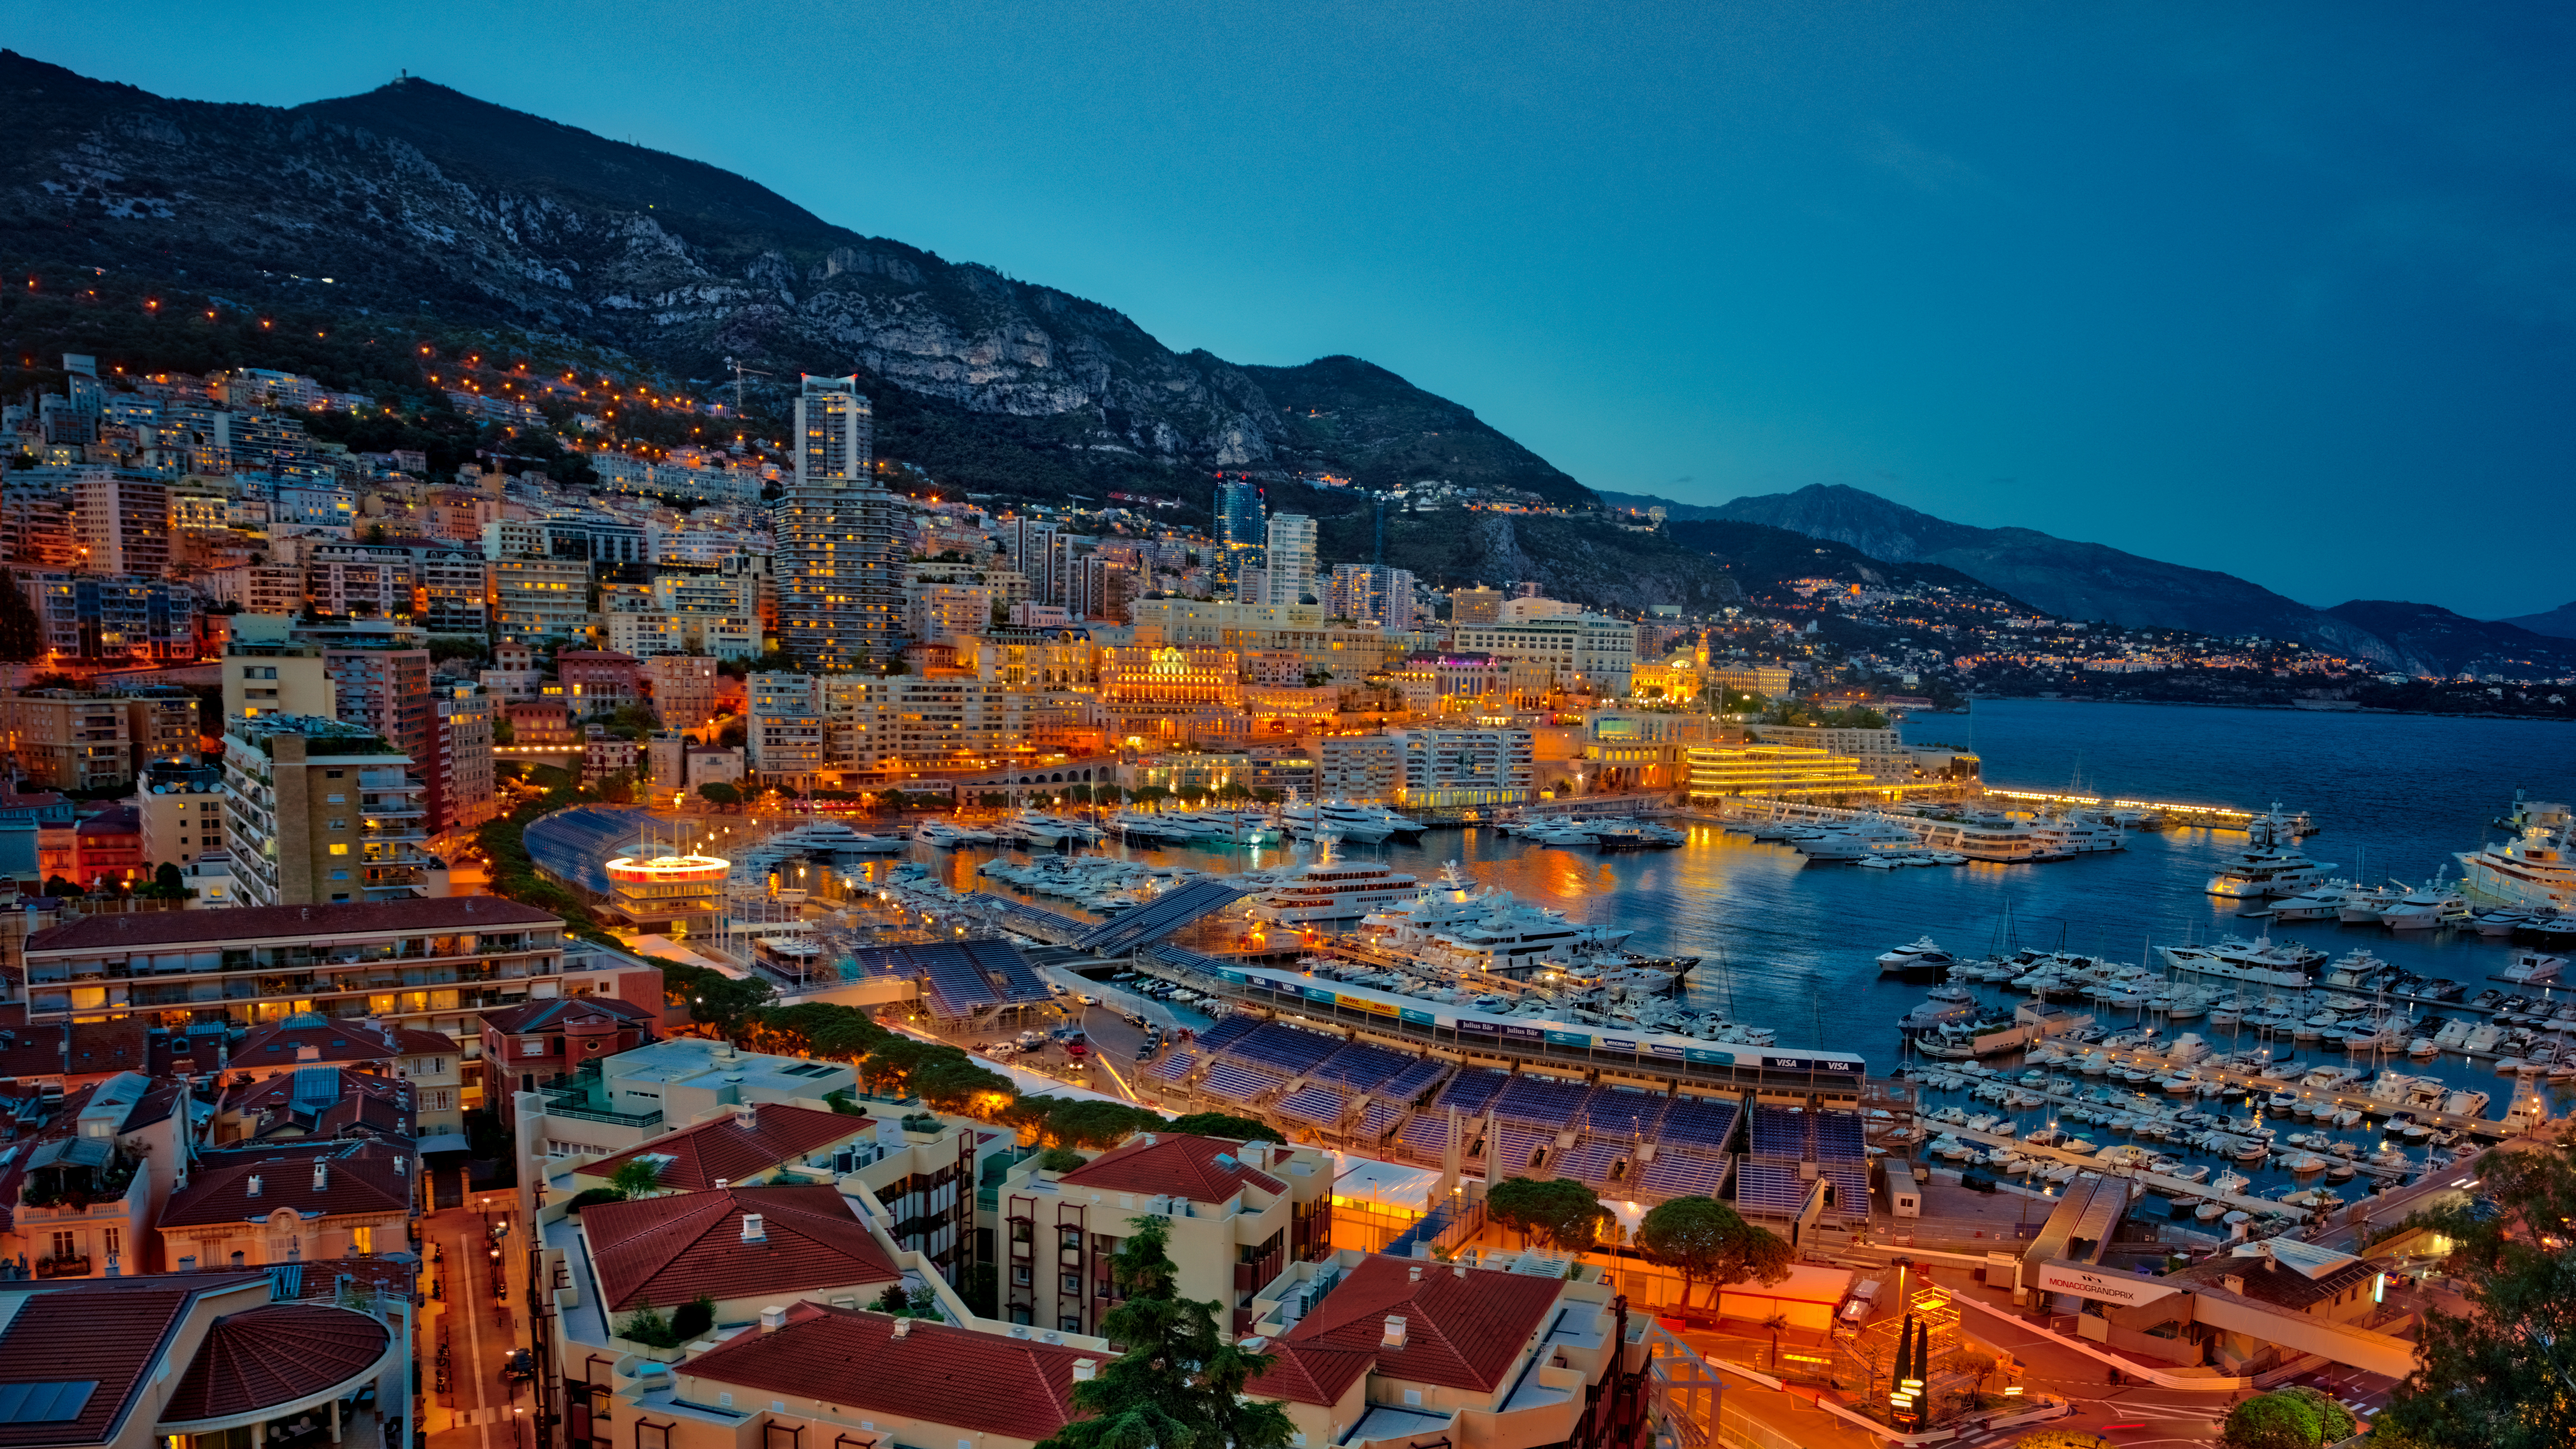 General 7680x4320 Monaco panorama building lights water landscape mountain top bay yacht Trey Ratcliff cityscape